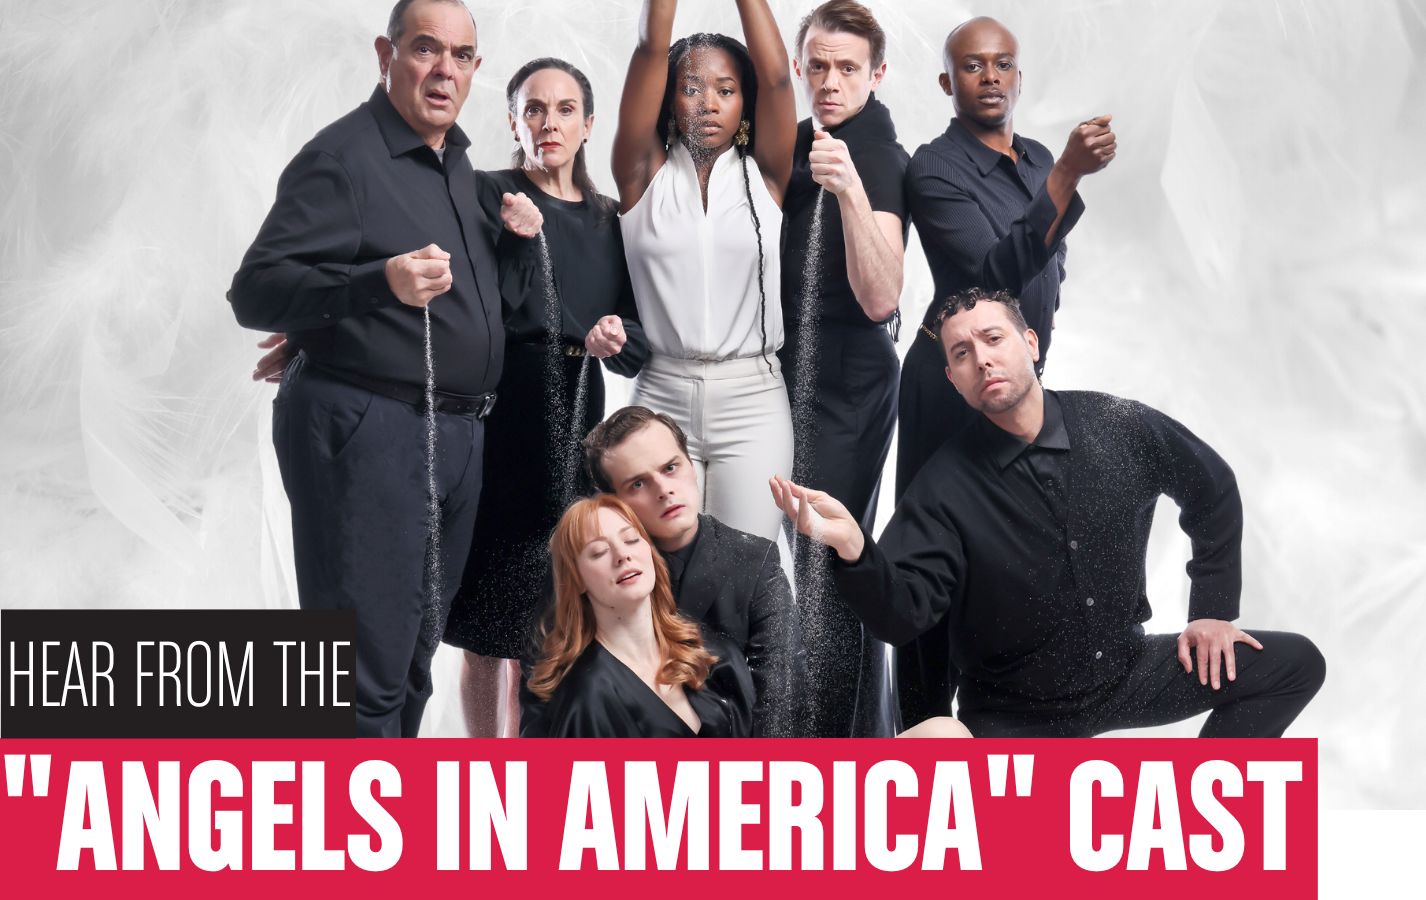 Cast of "Angels in America" Photo by Tony Powell.